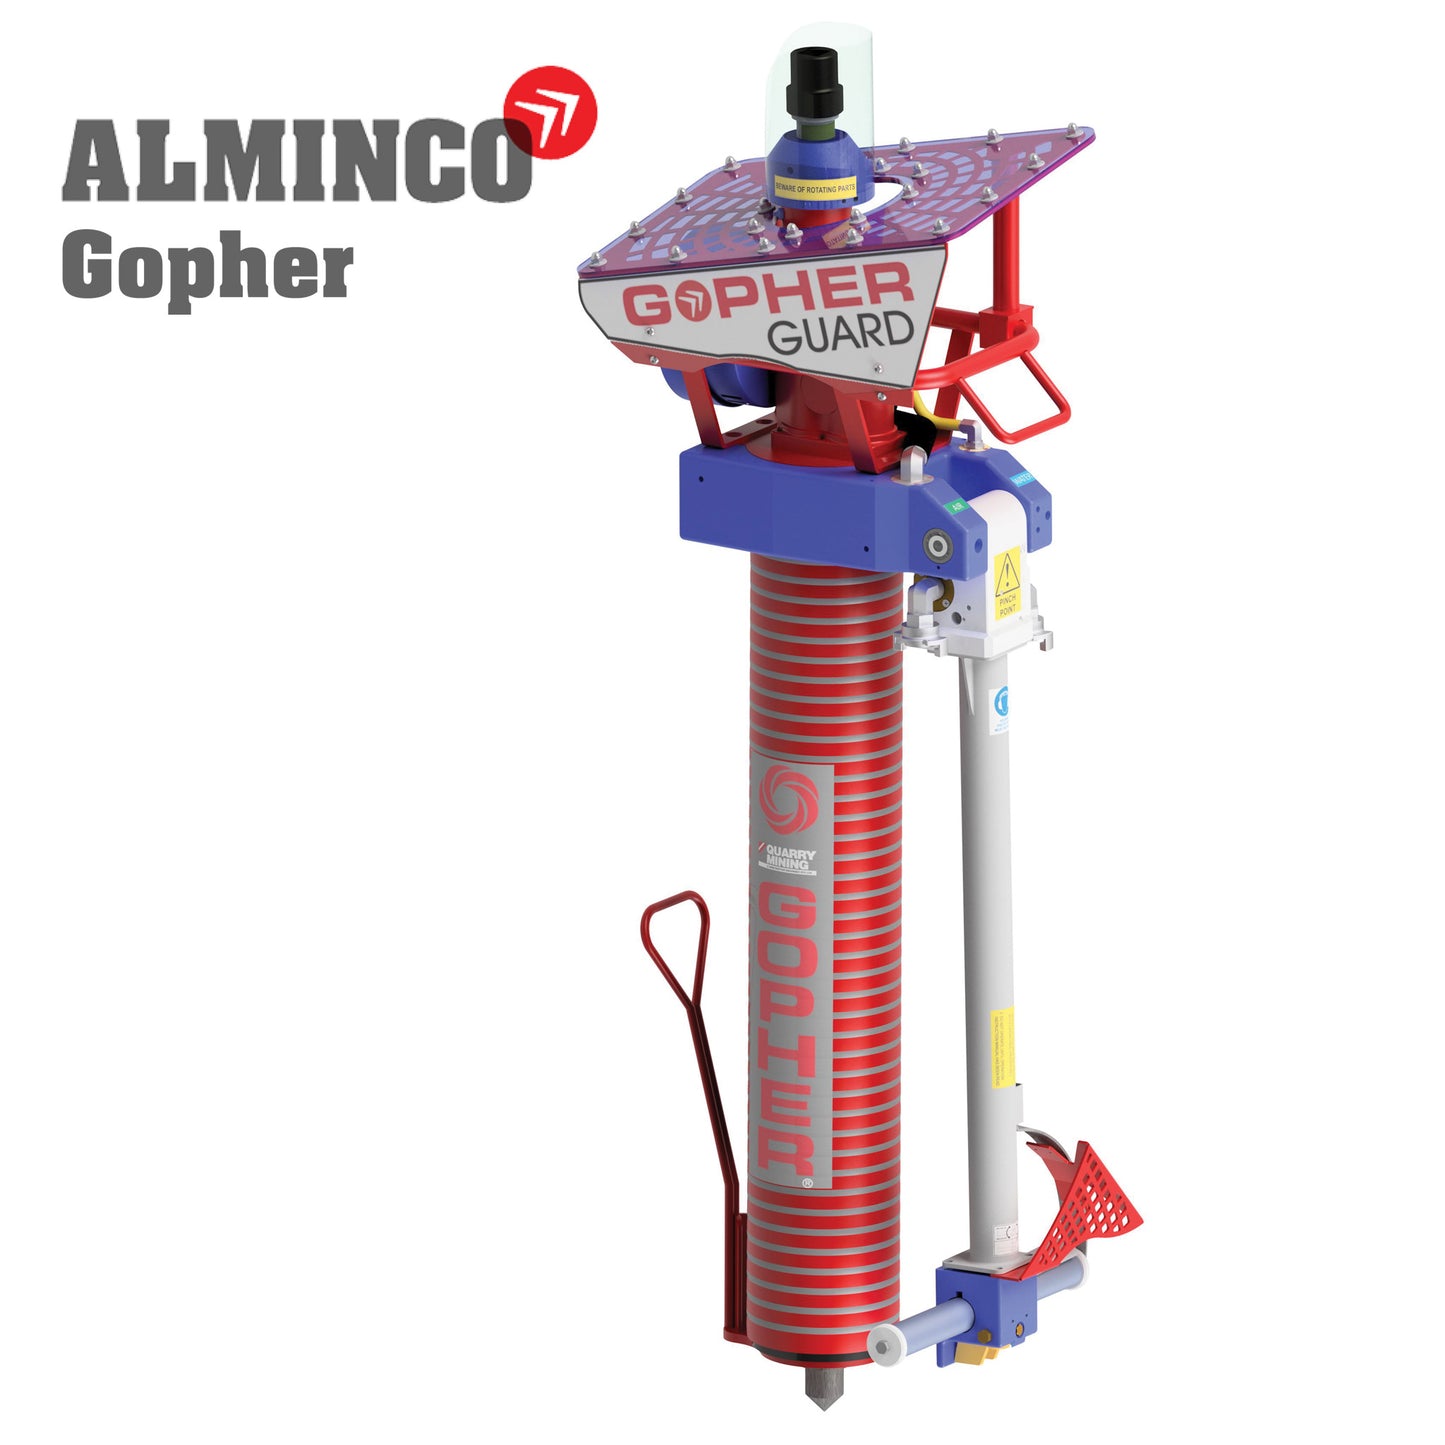 Alminco Gopher from Quarry Mining